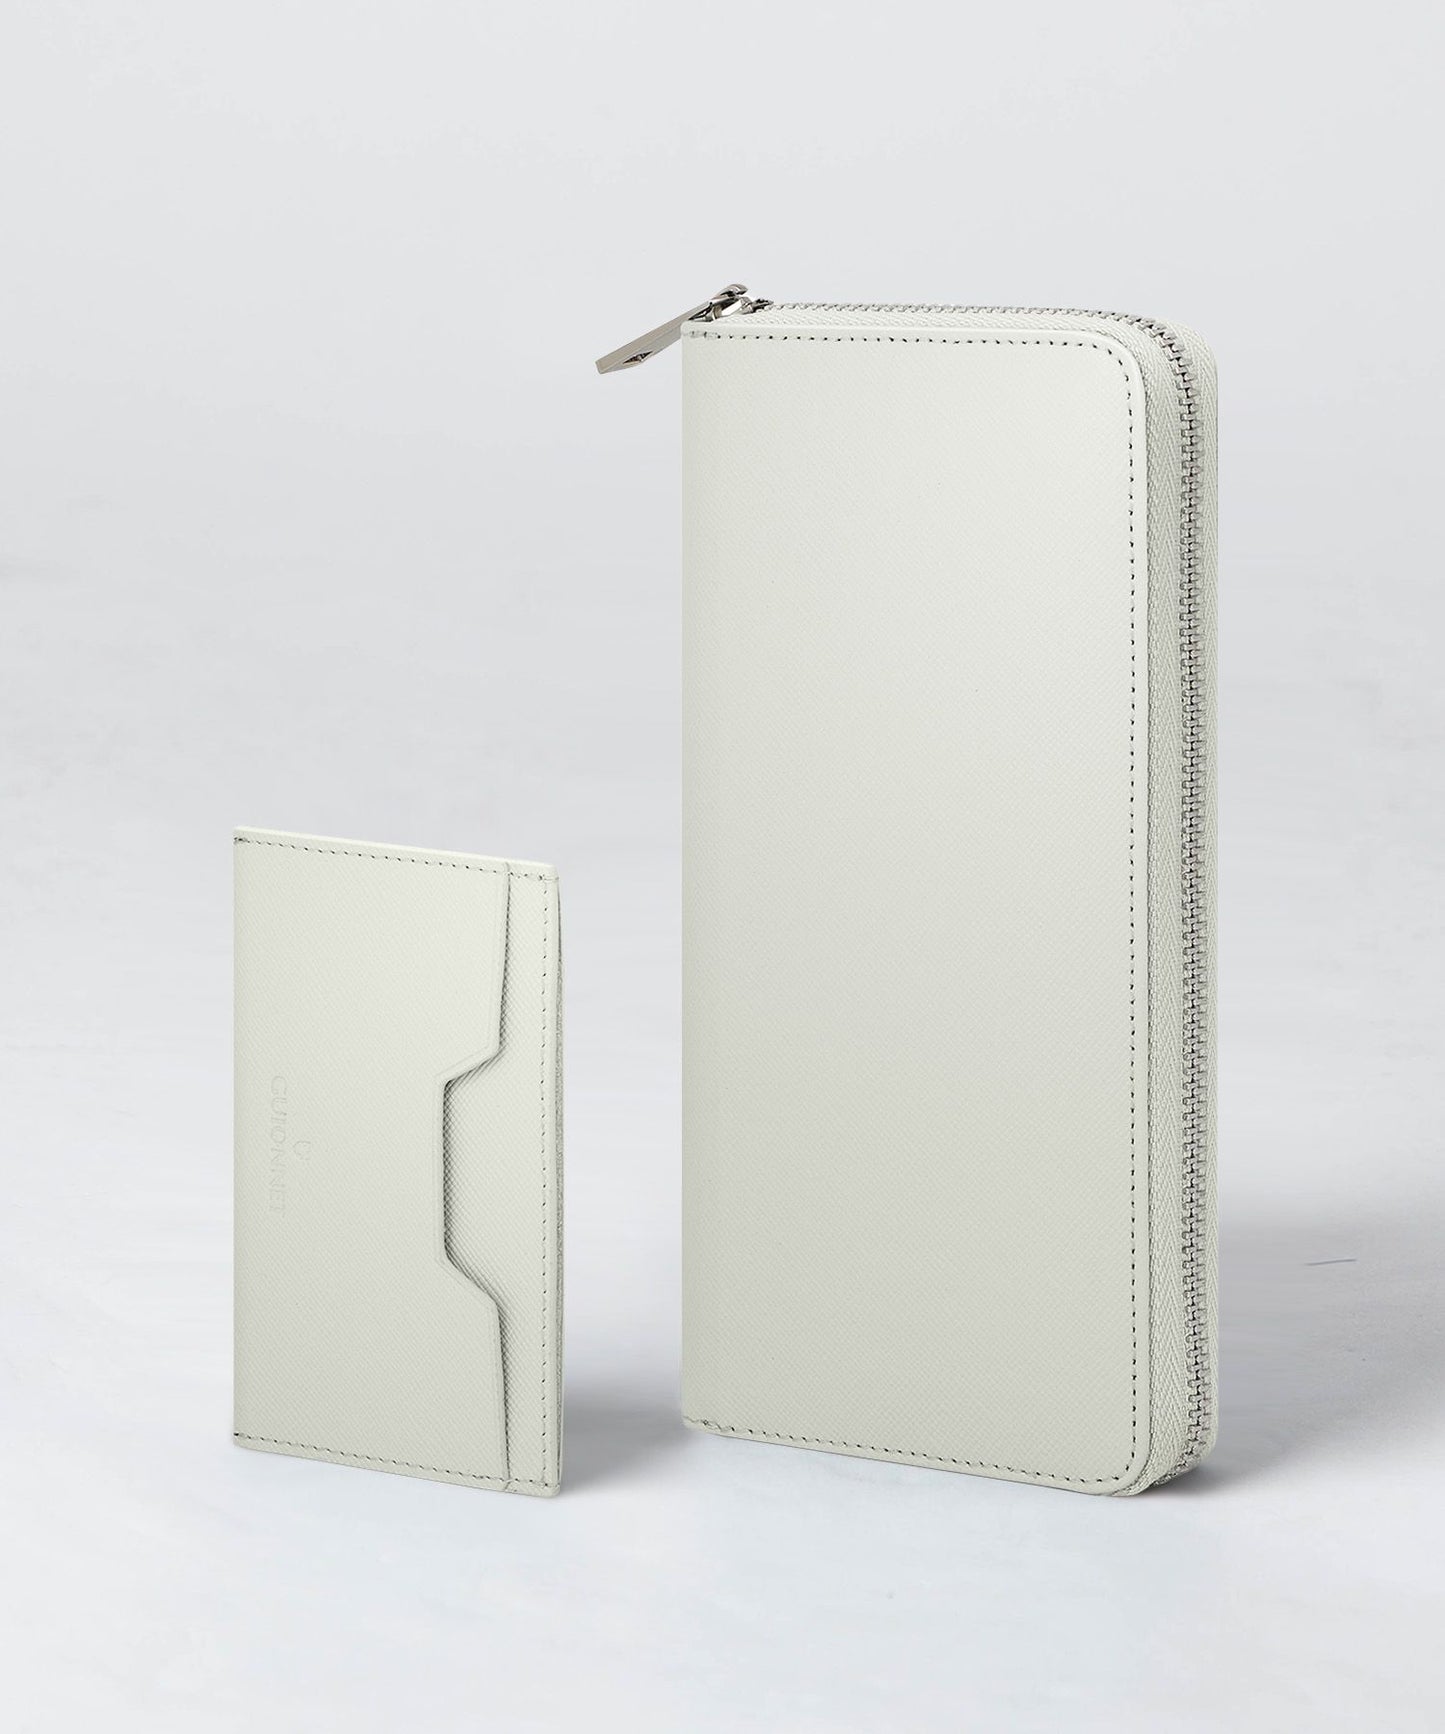 Saffiano long wallet with business card holder